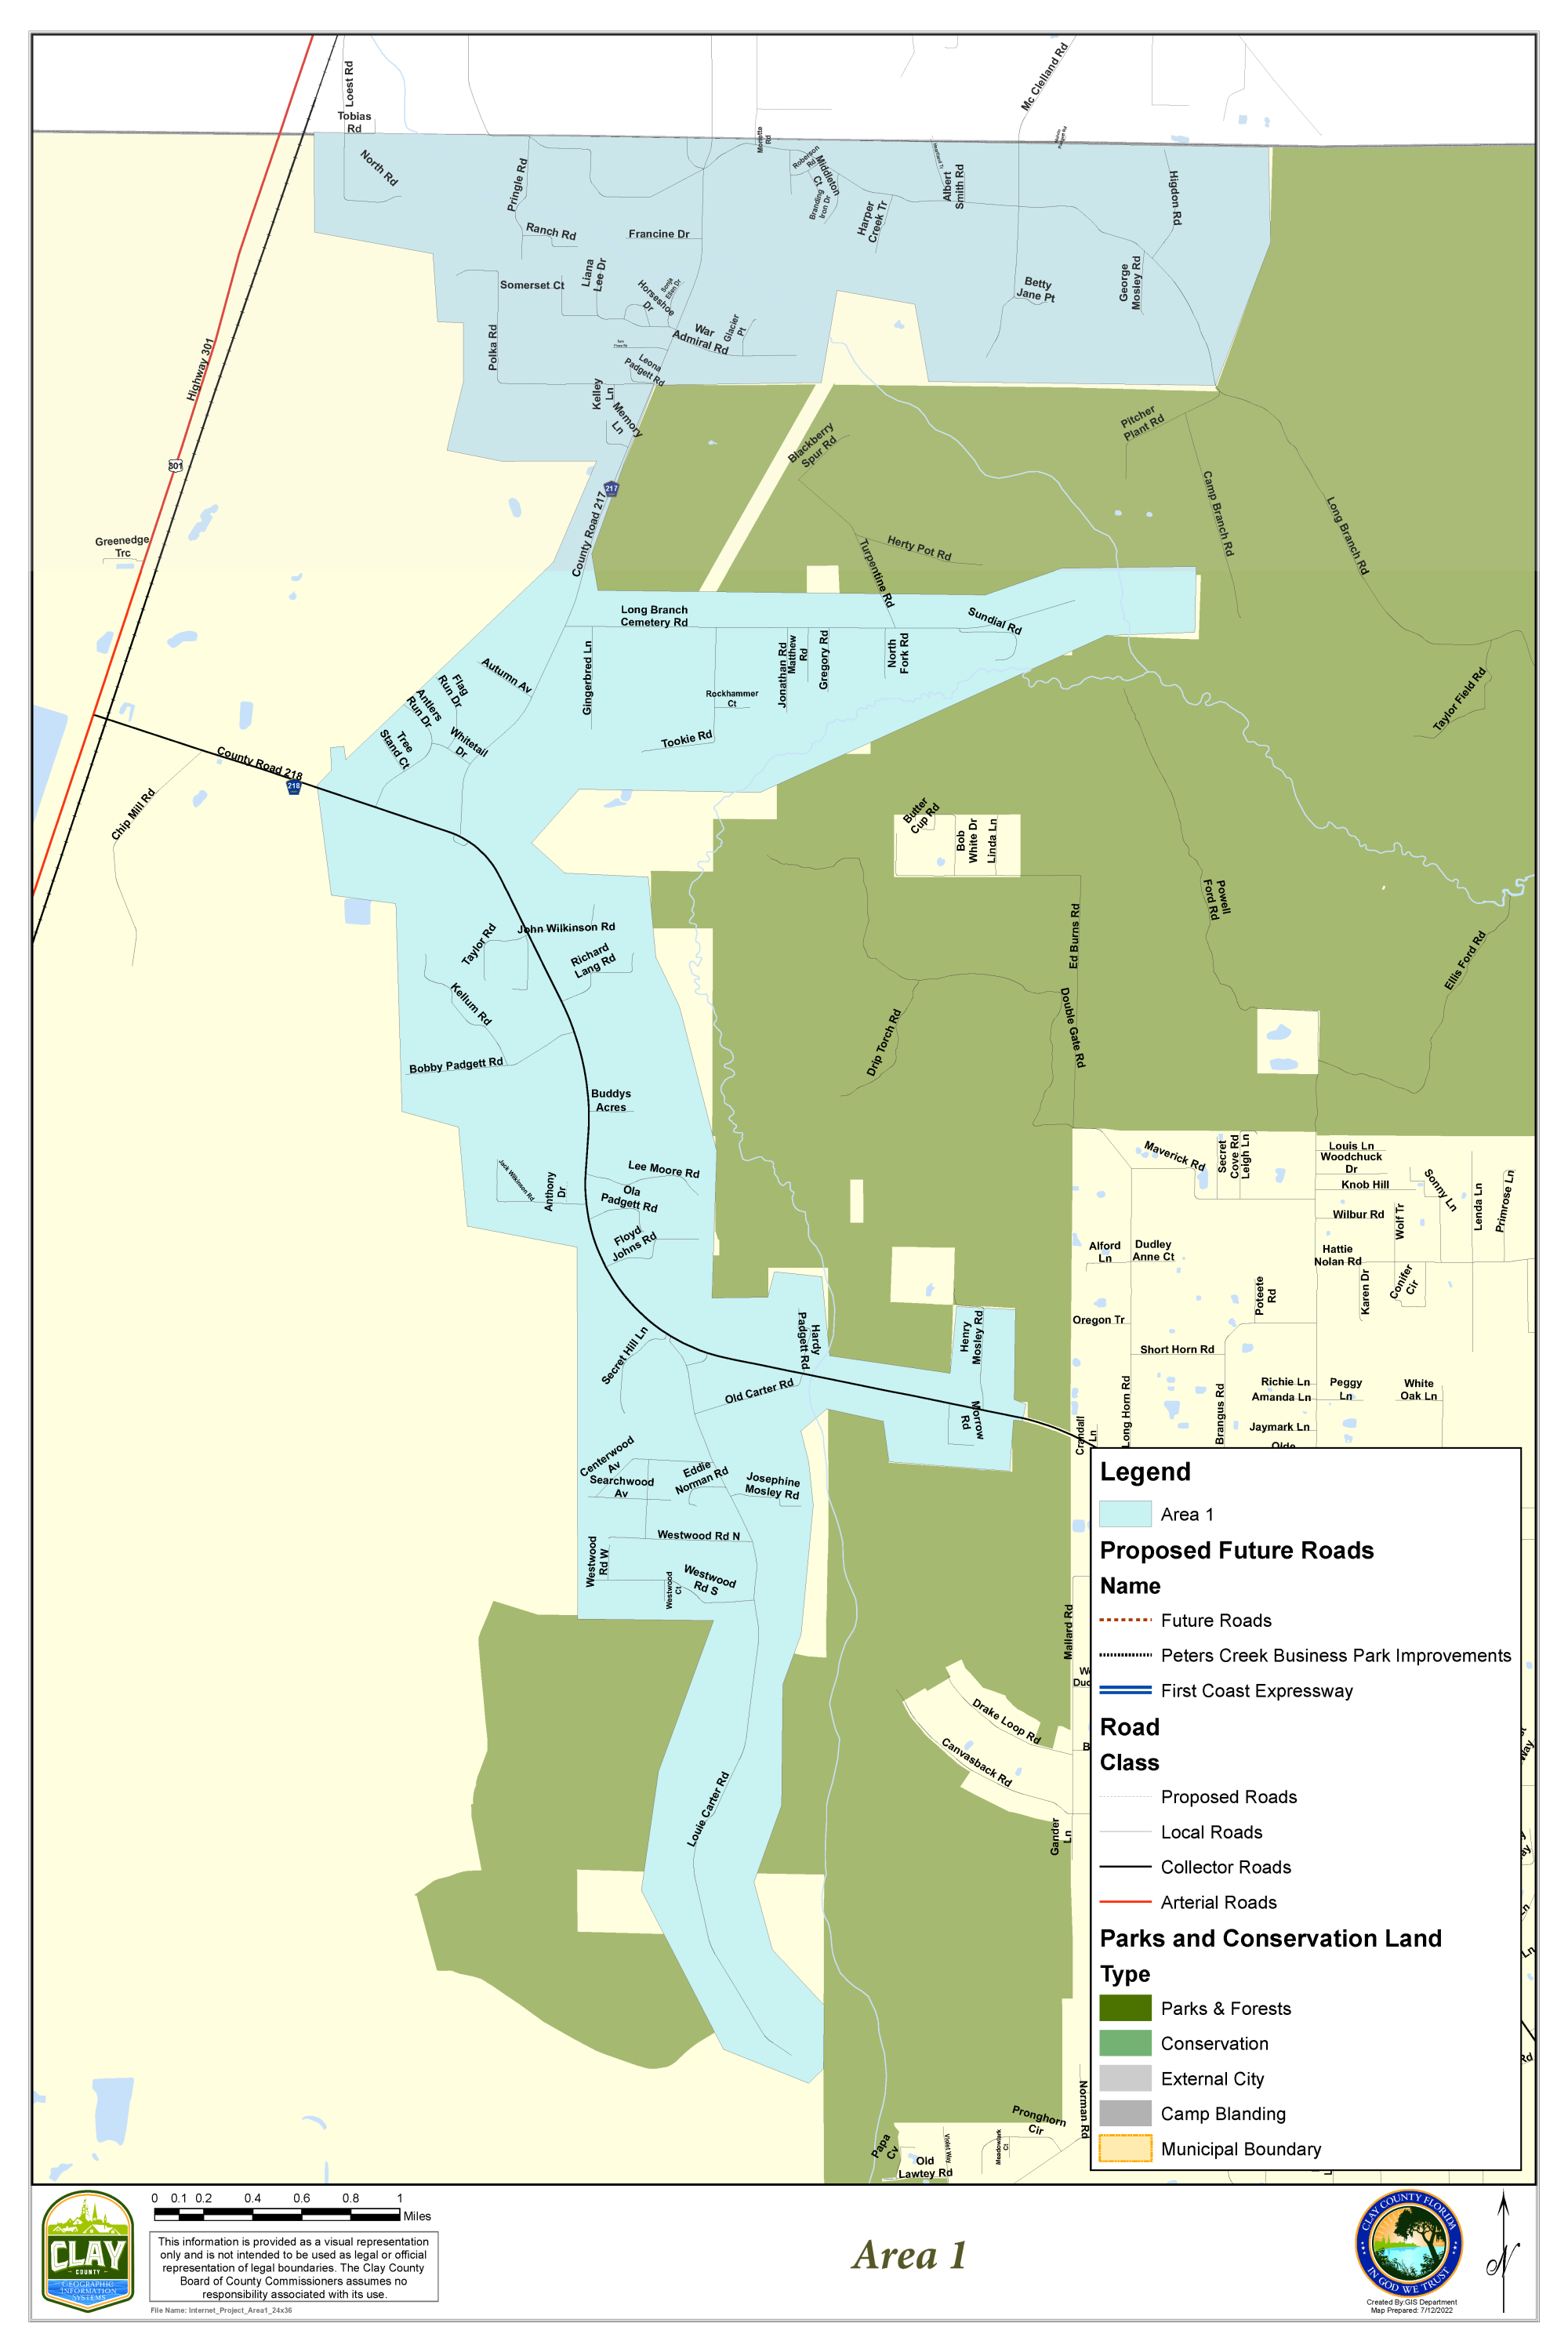 Map of Area 1 of Phase 1, Clay Hill of the County's Broadband project